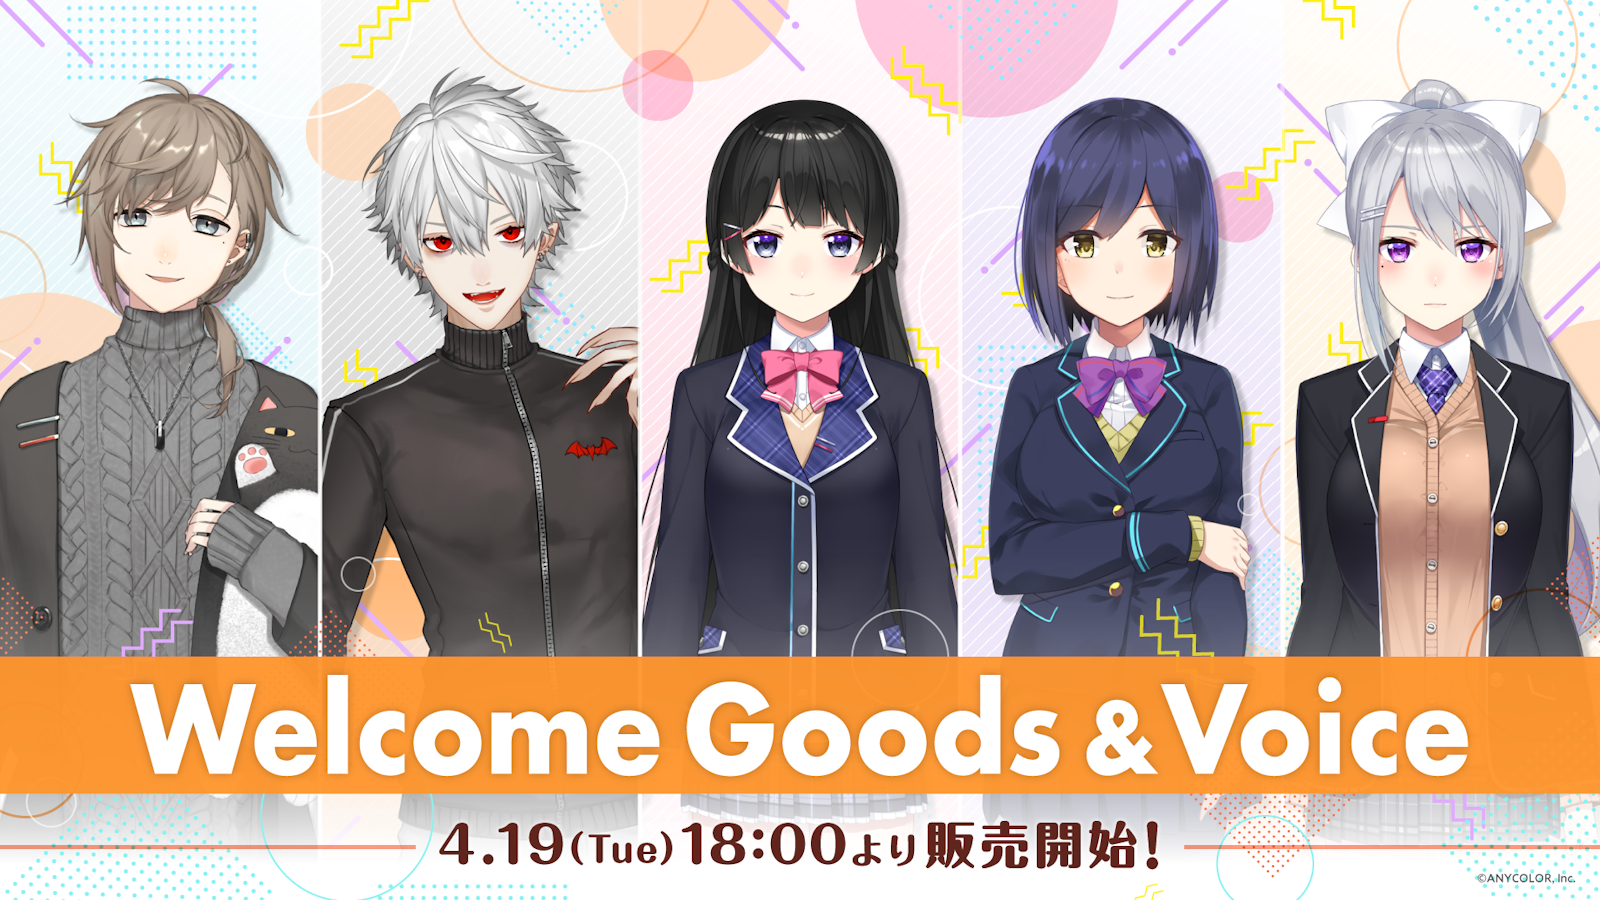 「Welcome Goods＆Voice」2022年4月19日(火)18時より、にじ